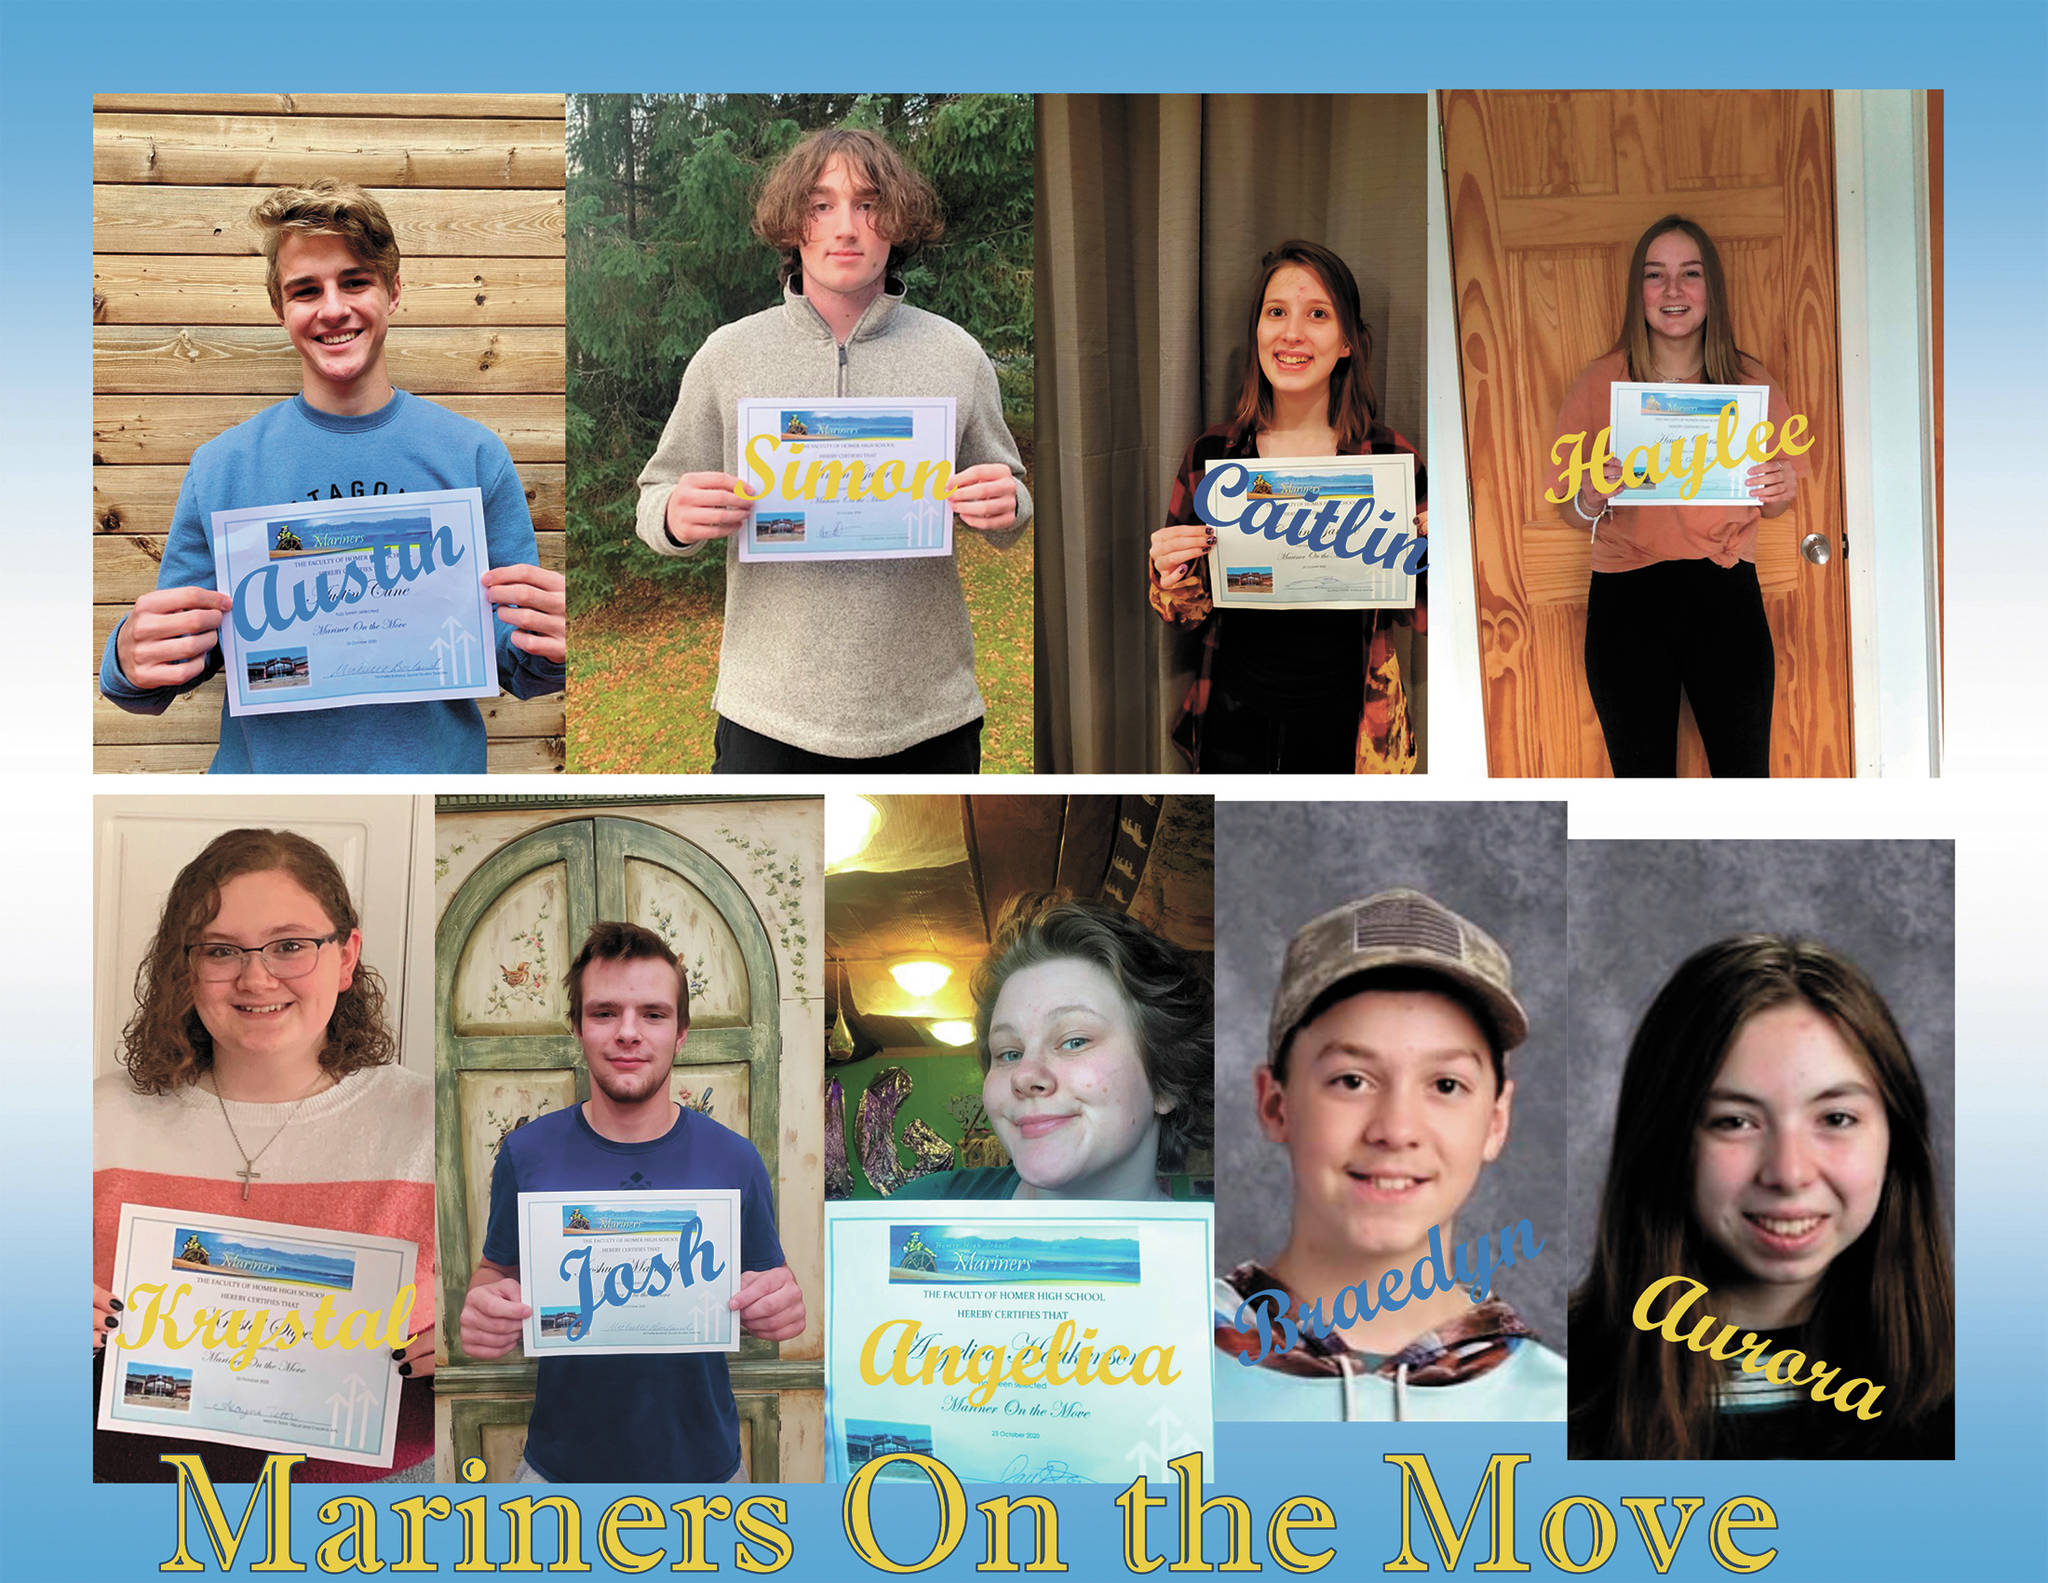 This compilation image shows the first quarter winners of the Mariners on the Move awards from Homer High School. (Image courtesy Paul Story)